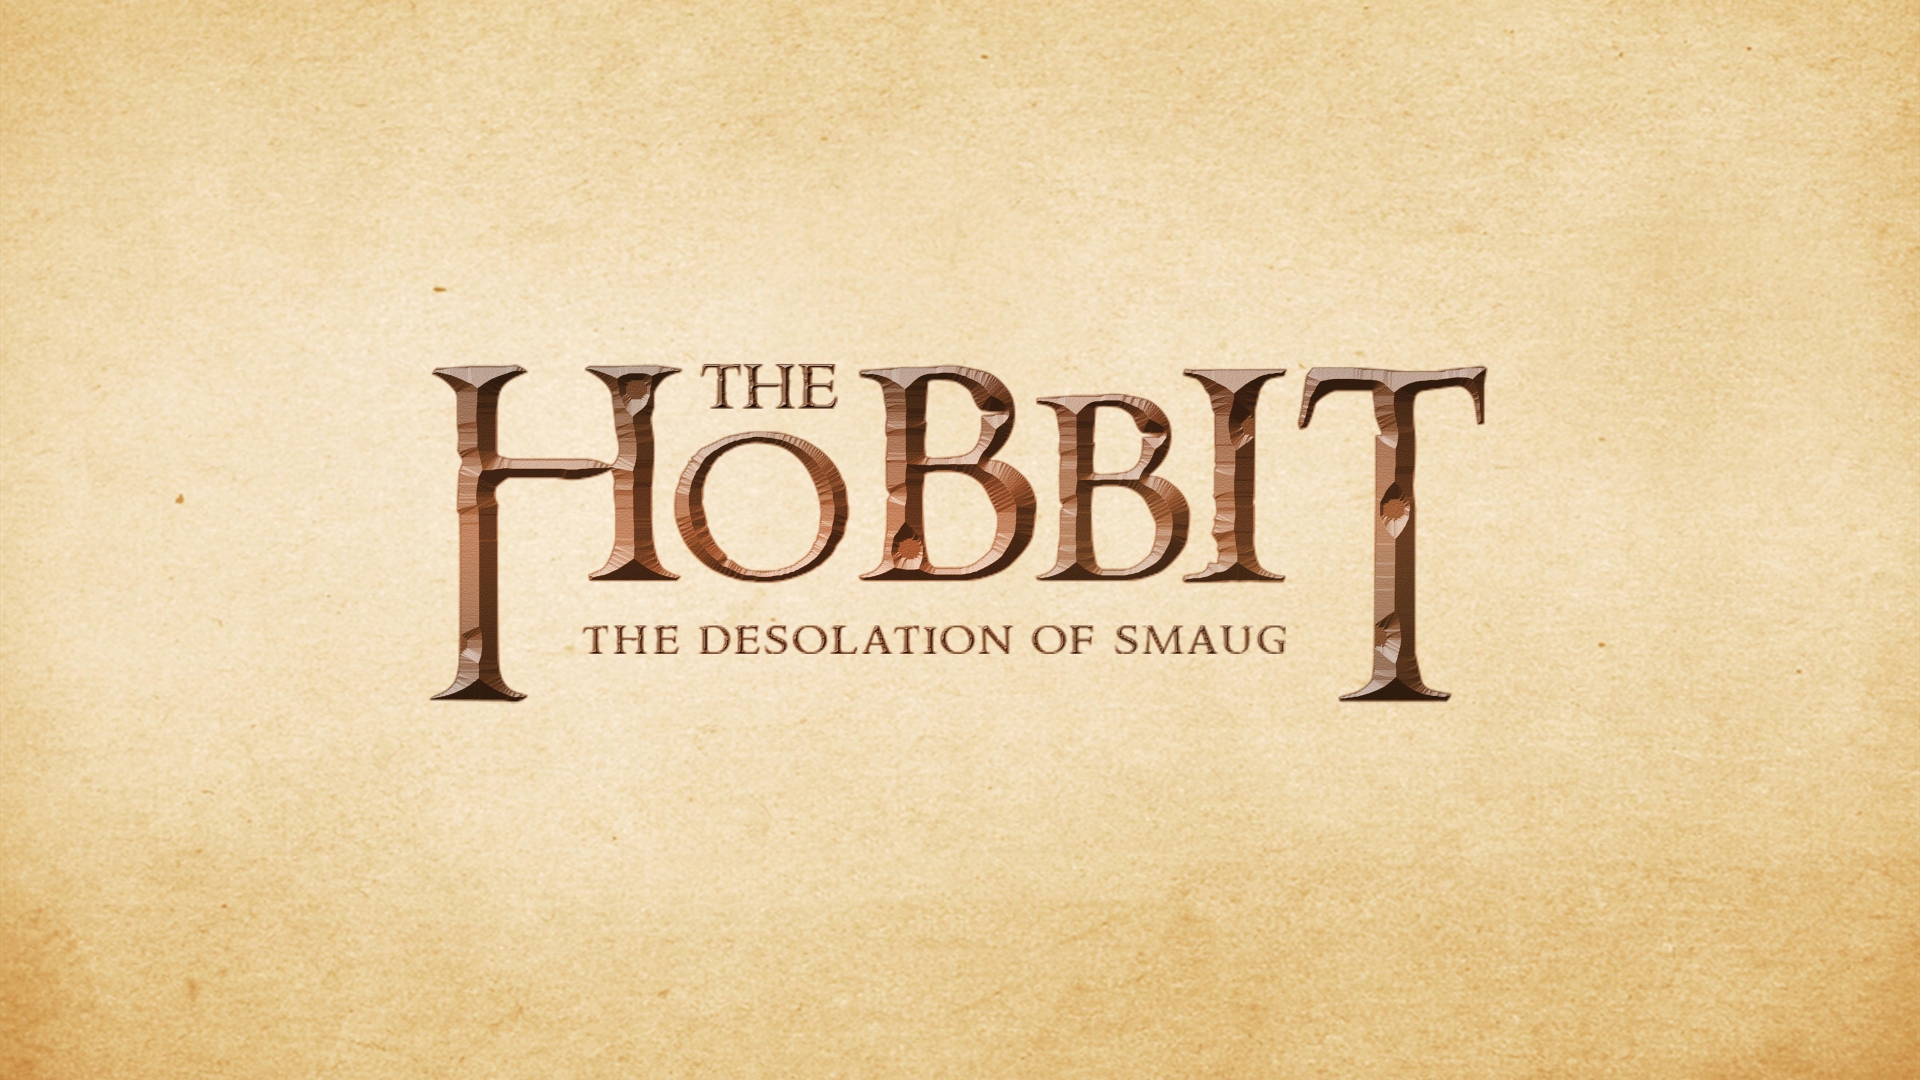 The Hobbit The Desolation of Smaug for 1920 x 1080 HDTV 1080p resolution